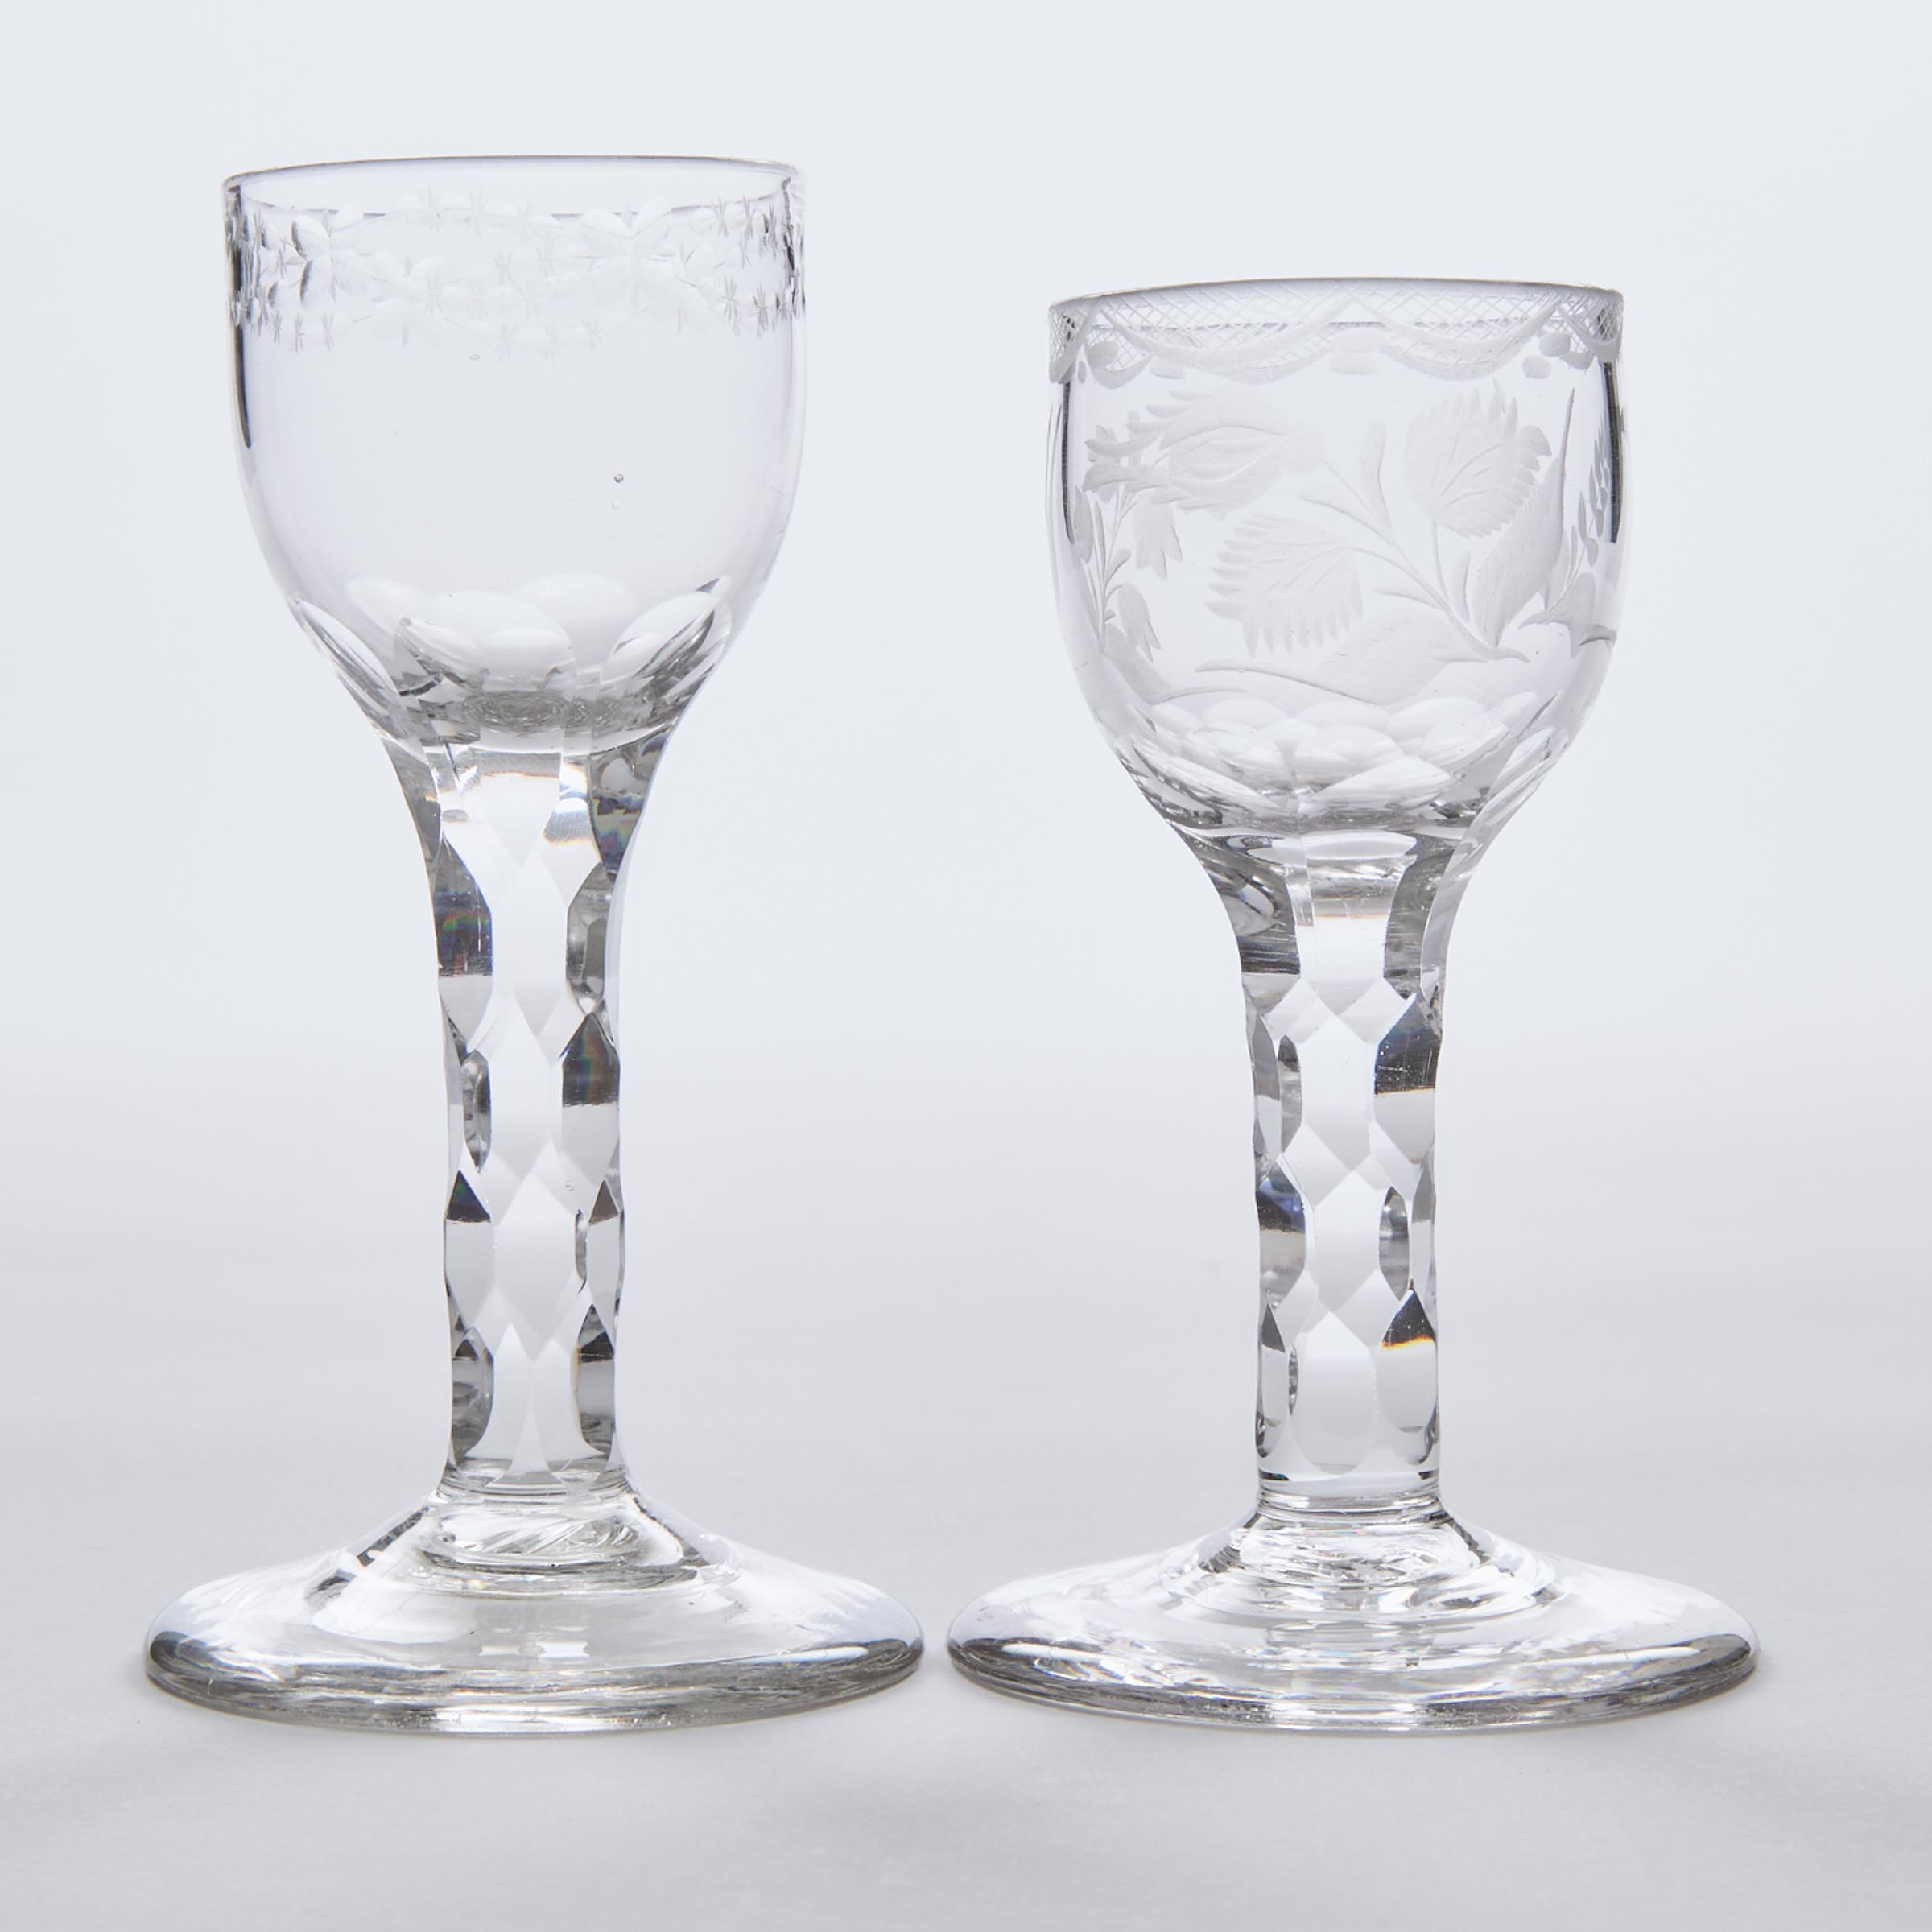 Two English Engraved Faceted Stemmed Wine Glasses, c.1765-80